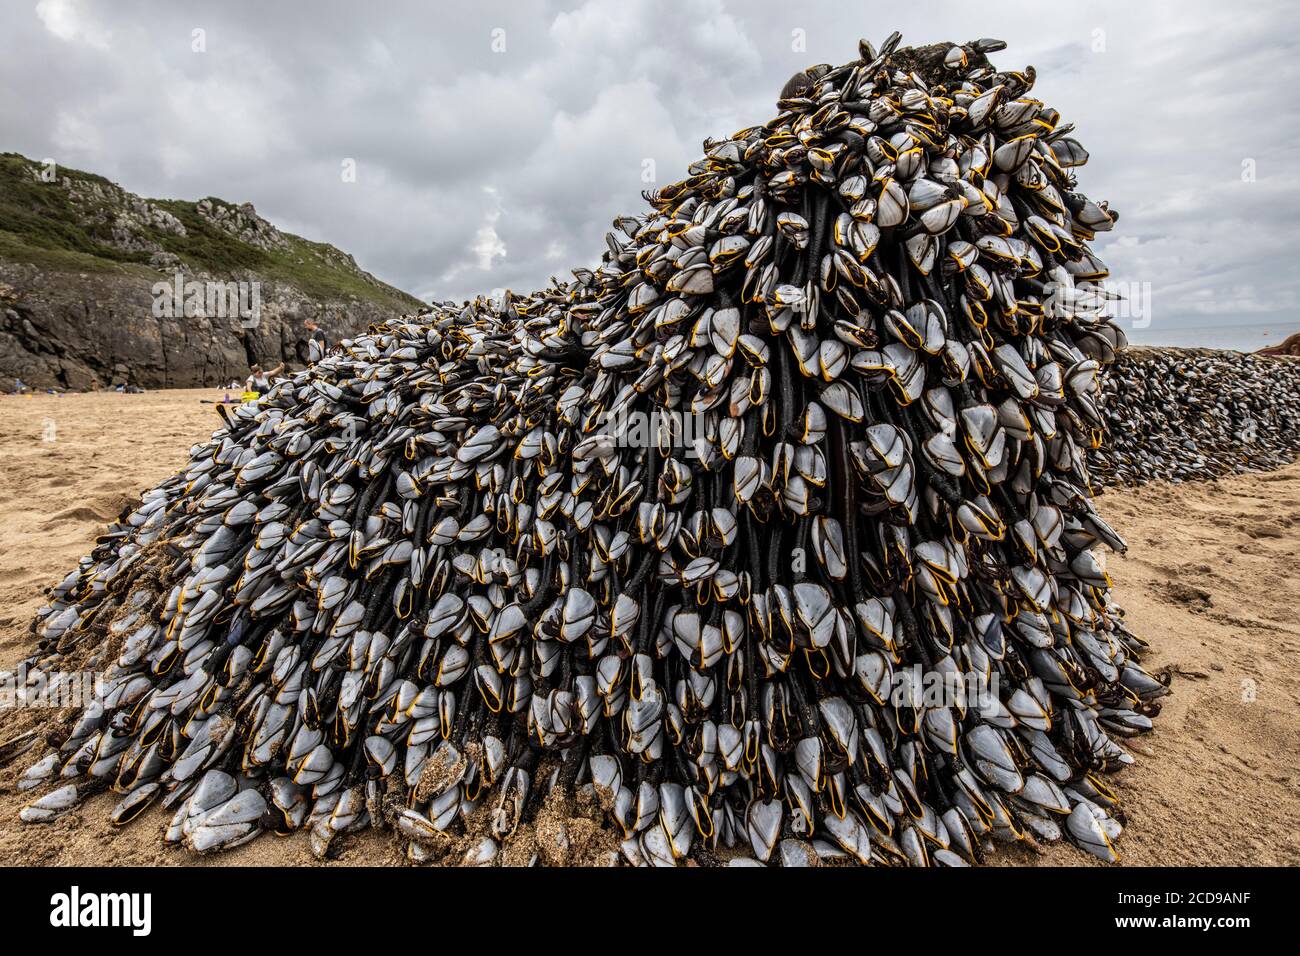 Goose barnacles attached to an old tree washed up at Barafundle Bay along West Wales Coastal Path in Pembrokeshire, United Kingdom Stock Photo